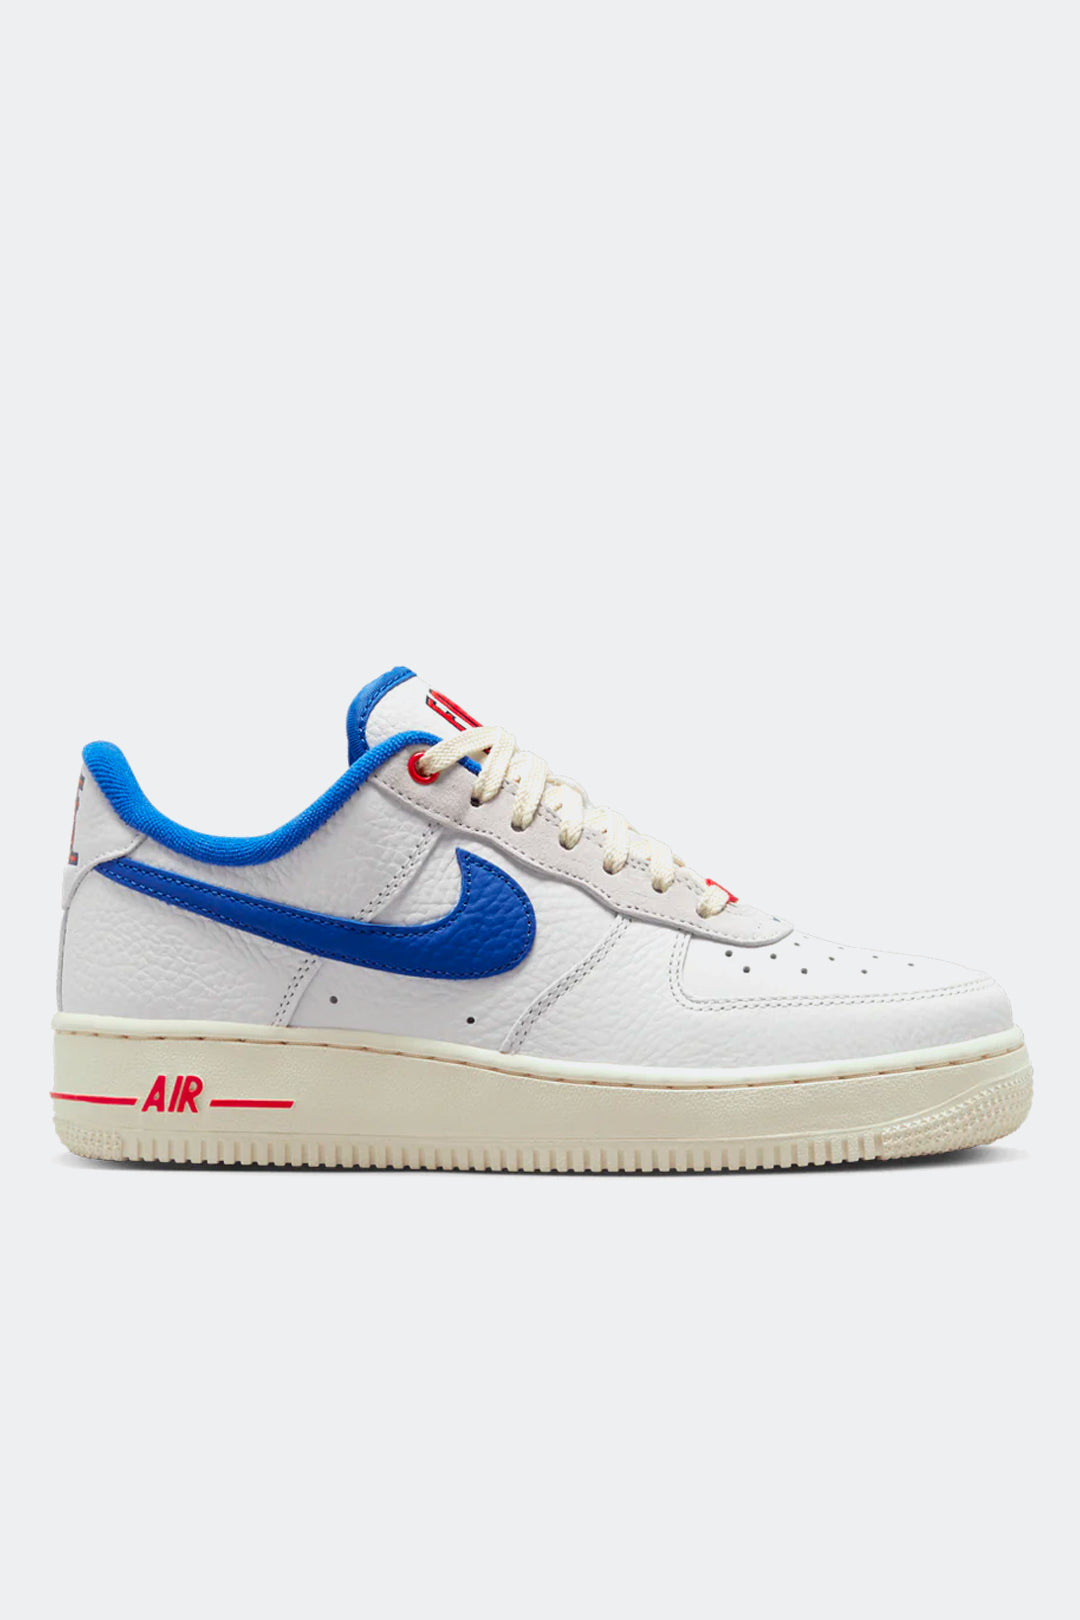 NIKE AIR FORCE 1 '07 LX "COMMAND FORCE" - MUJER - HYPE